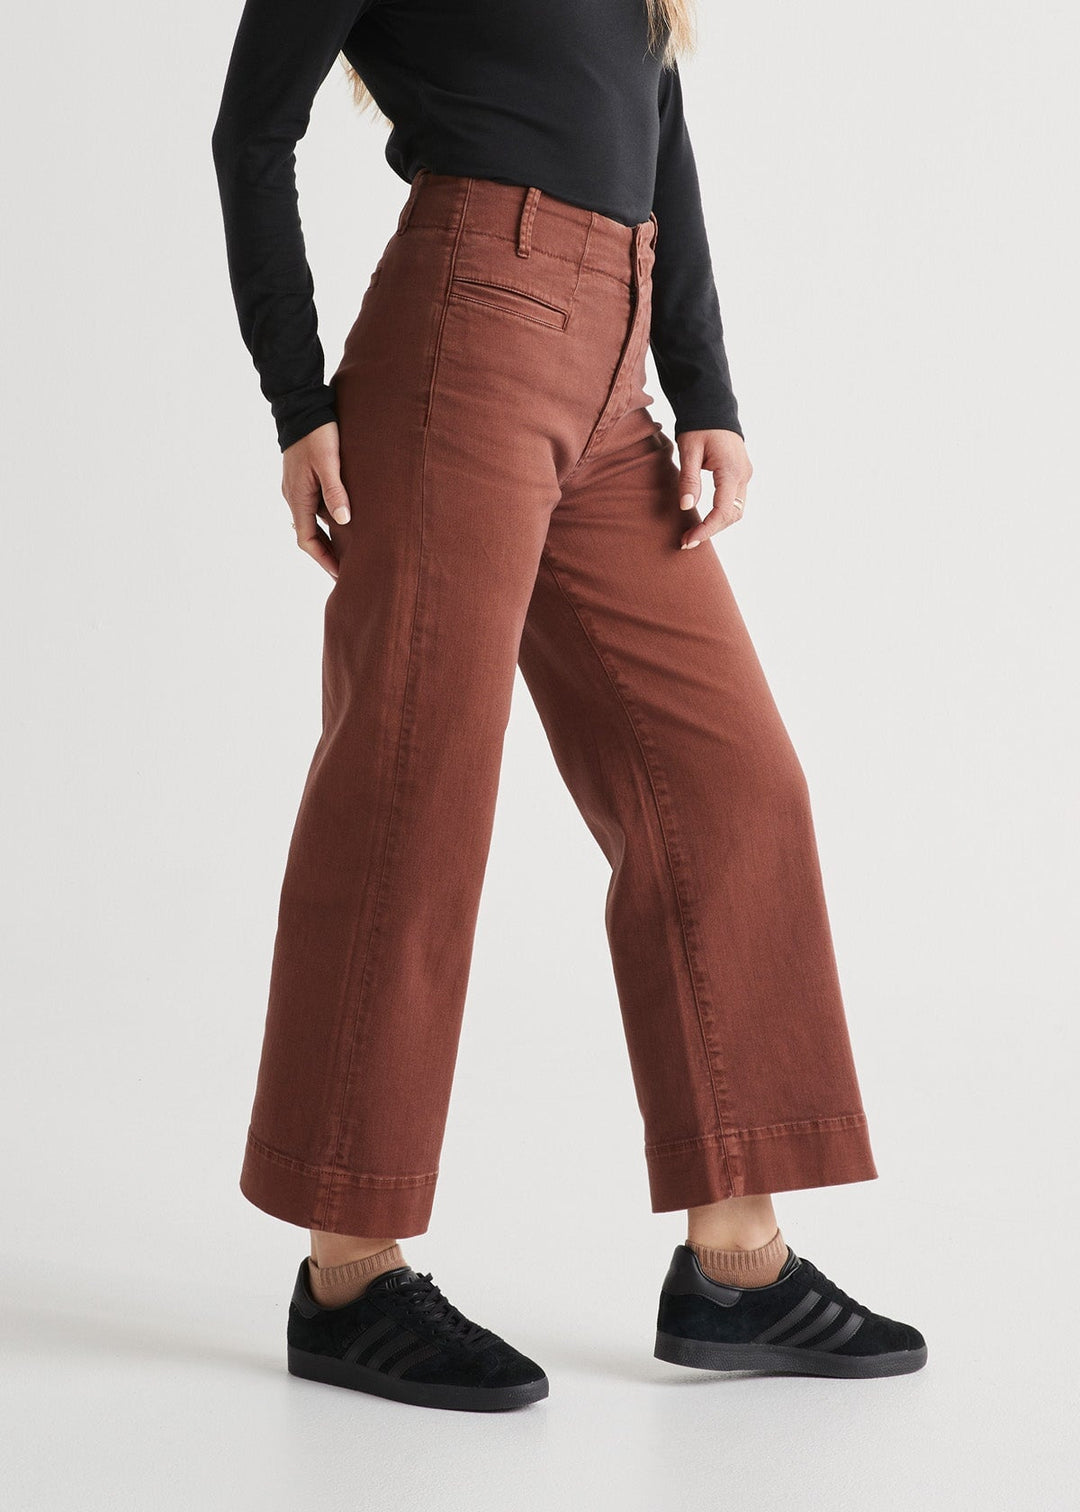 DU/ER - LuxTwill High Rise Trouser - all things being eco Chilliwack canada - women's clothing and accessories store - sustainable and eco friendly fashion